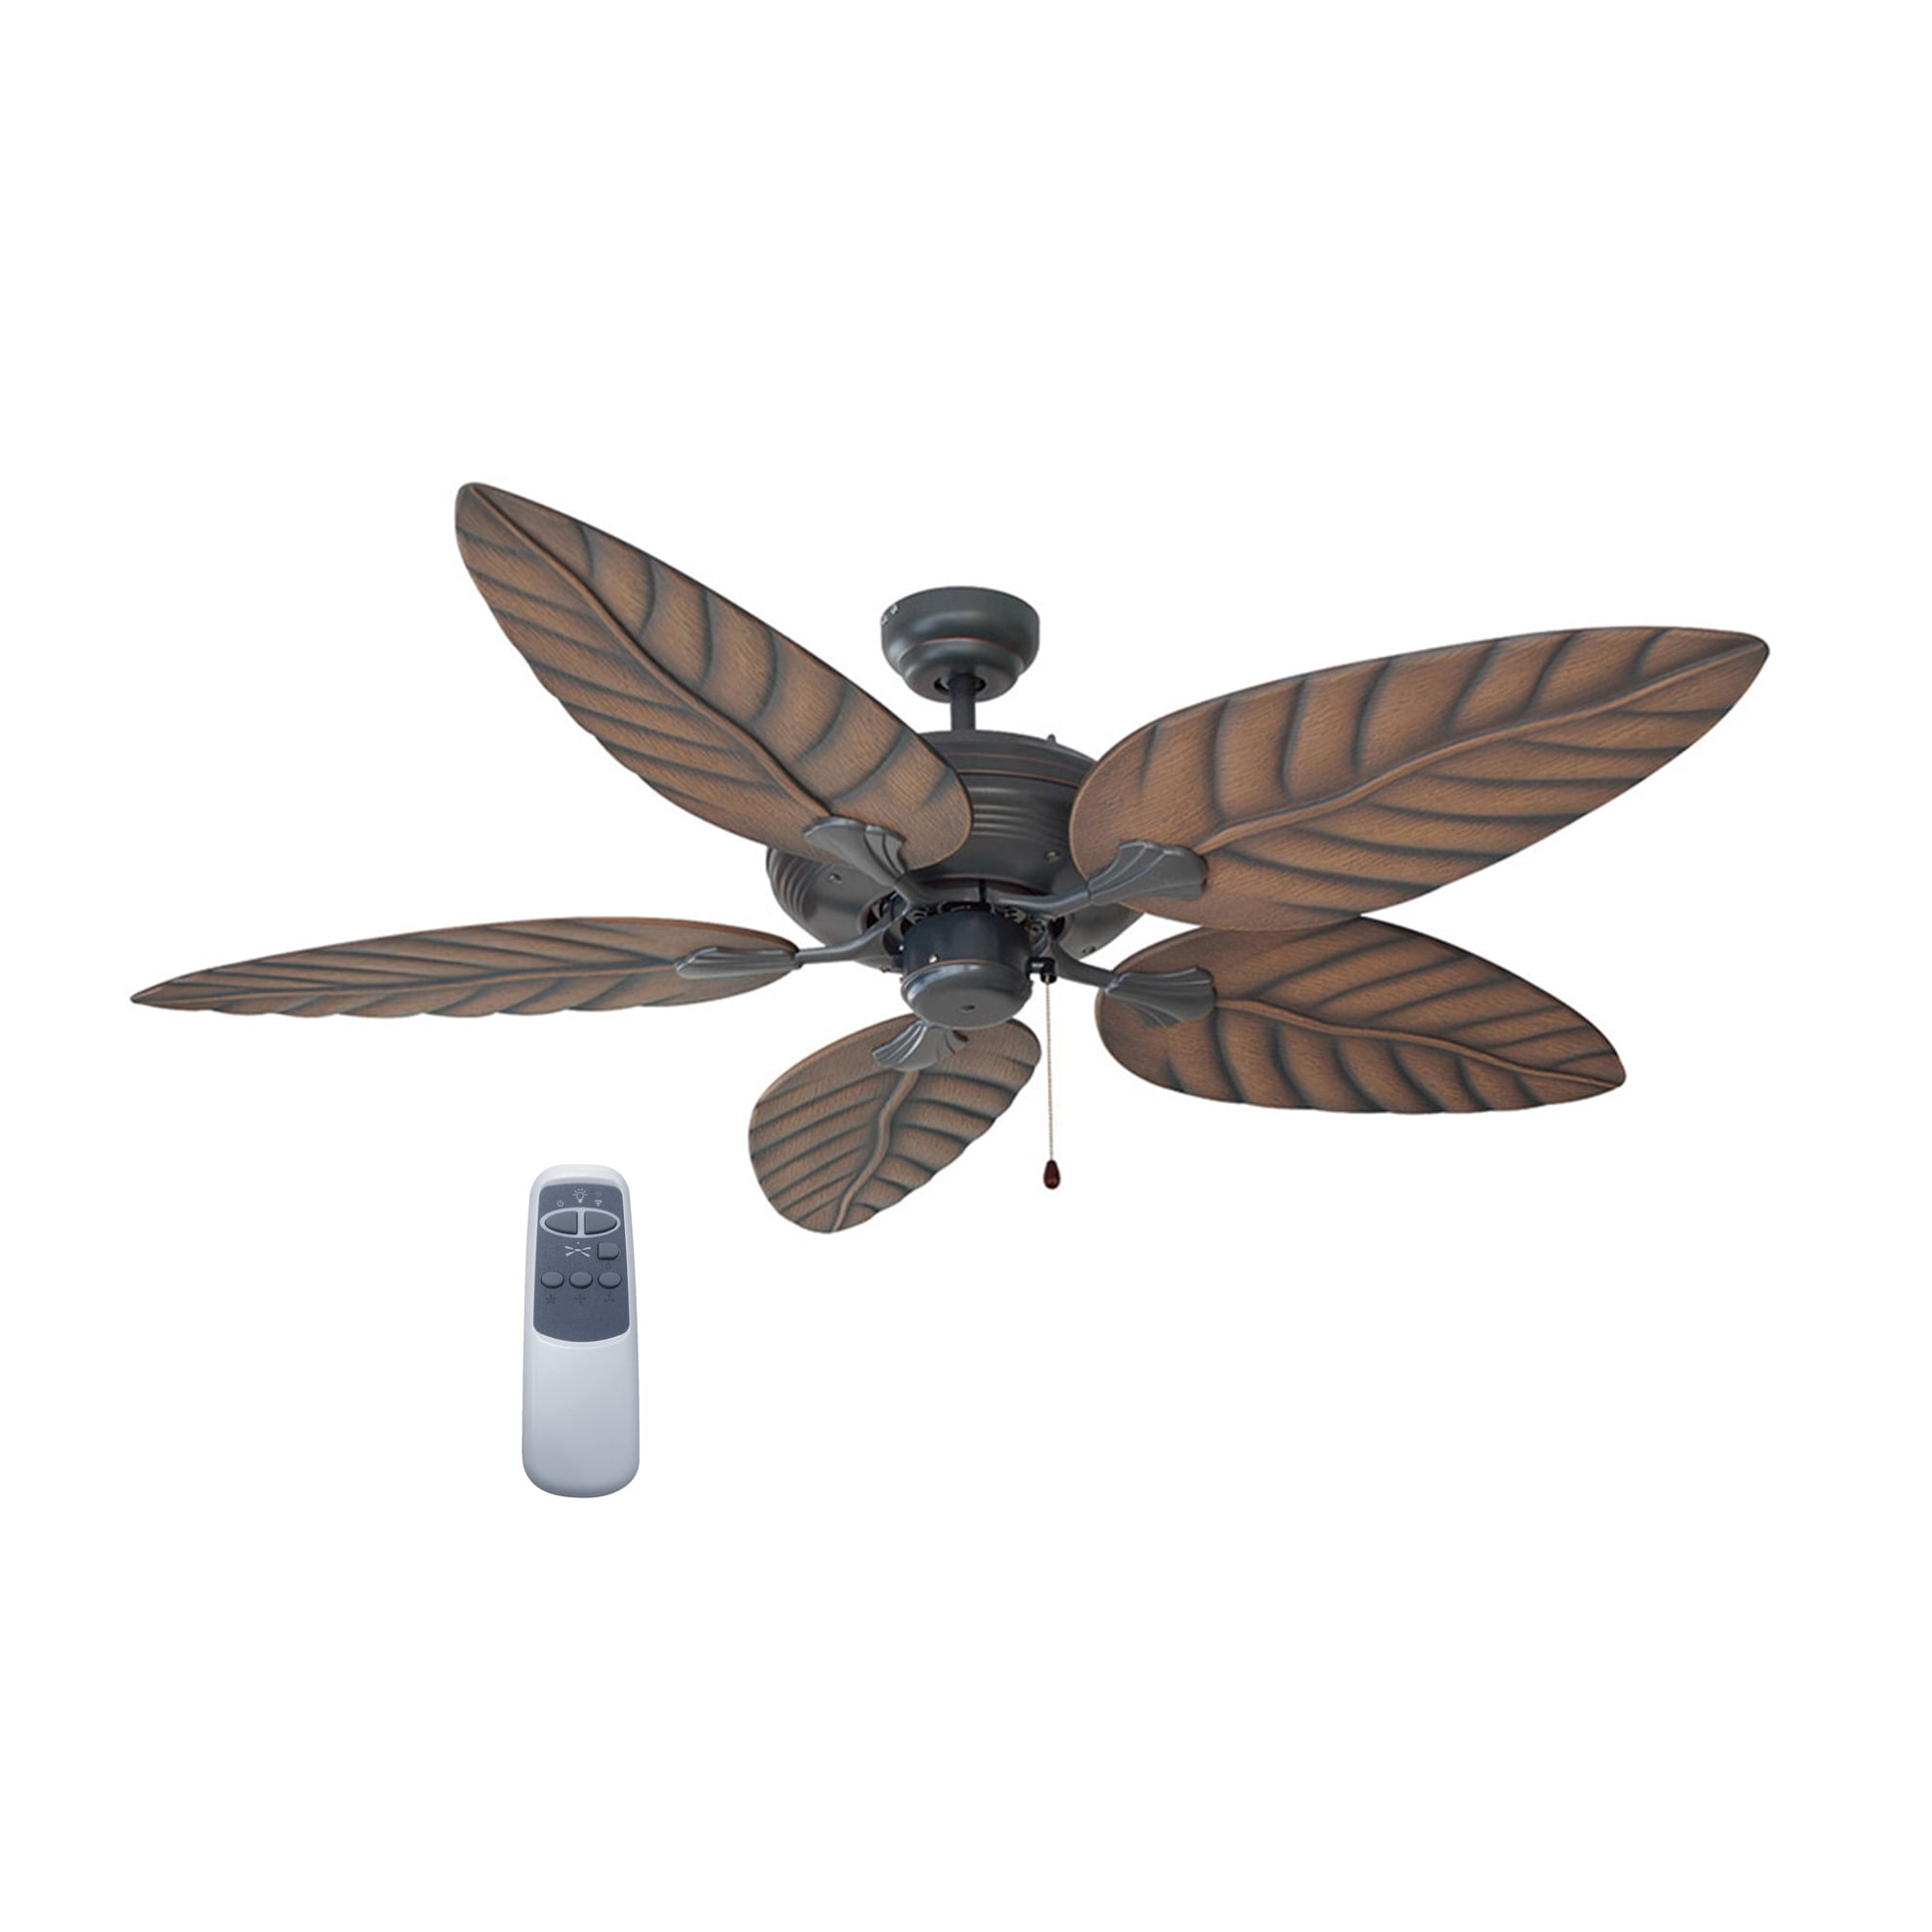 Martinique 52-Inch 5-Blade Ceiling Fan, Chestnut Blades, Oil Rubbed Bronze